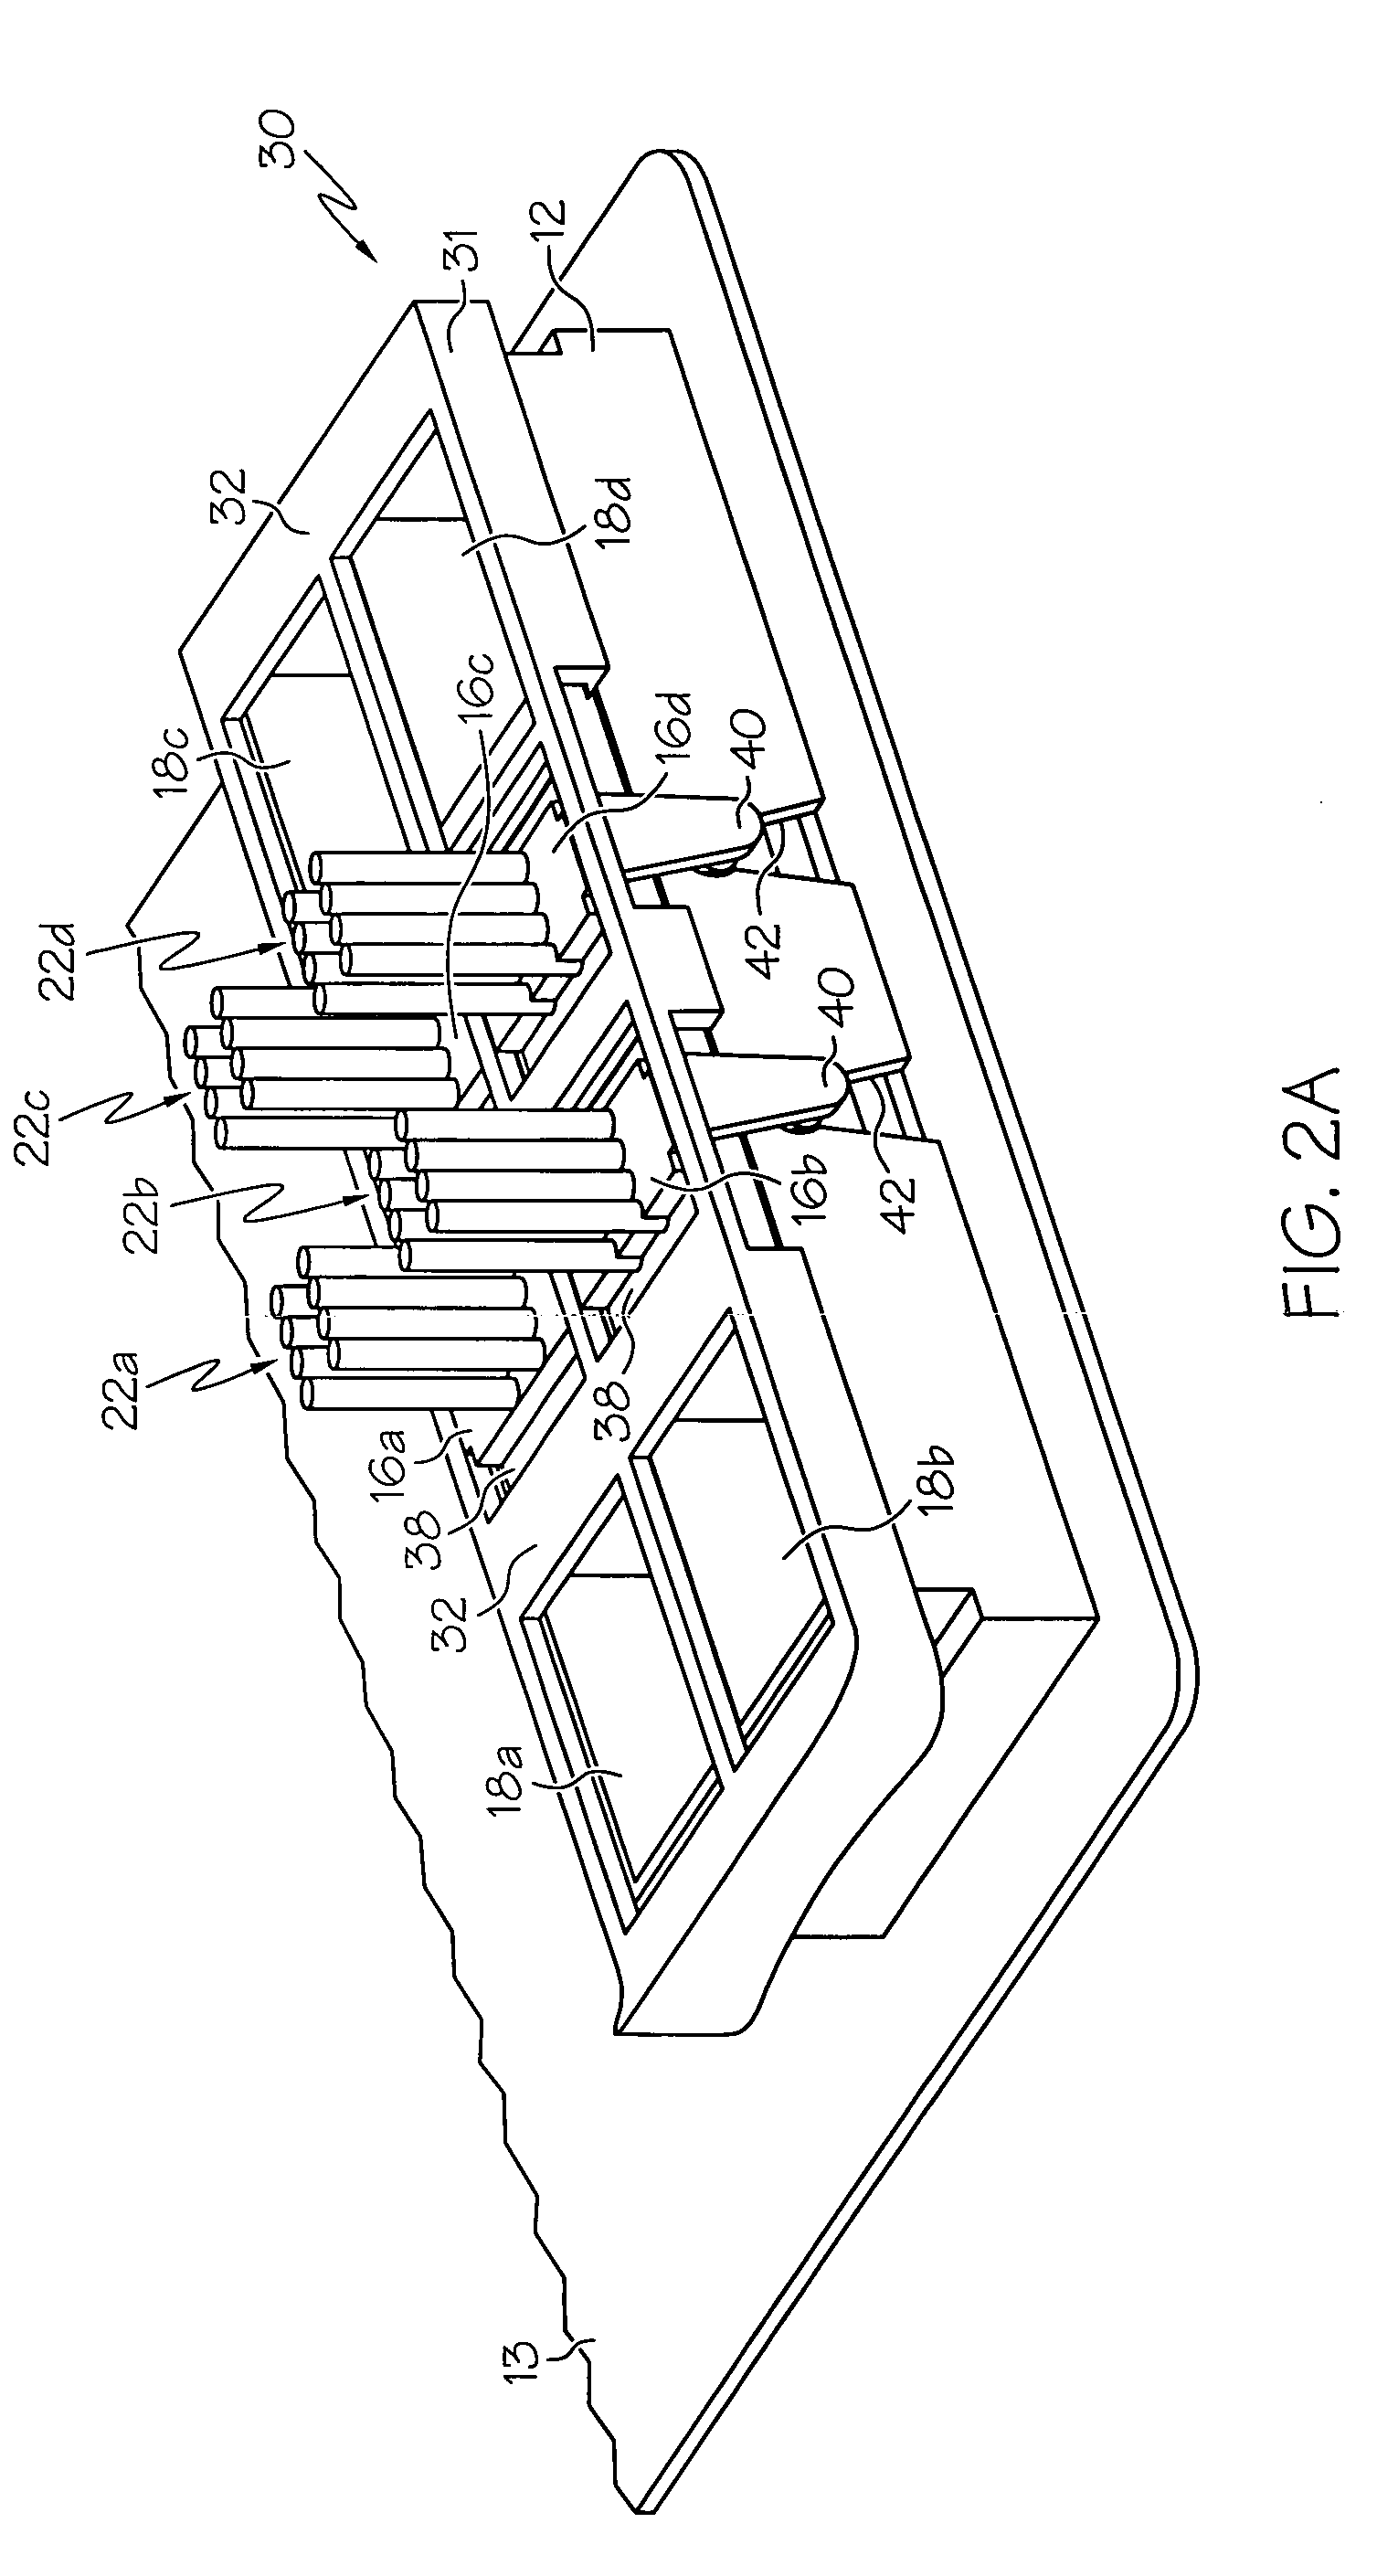 Multi-connector apparatus with connection-sequencing interlock mechanism